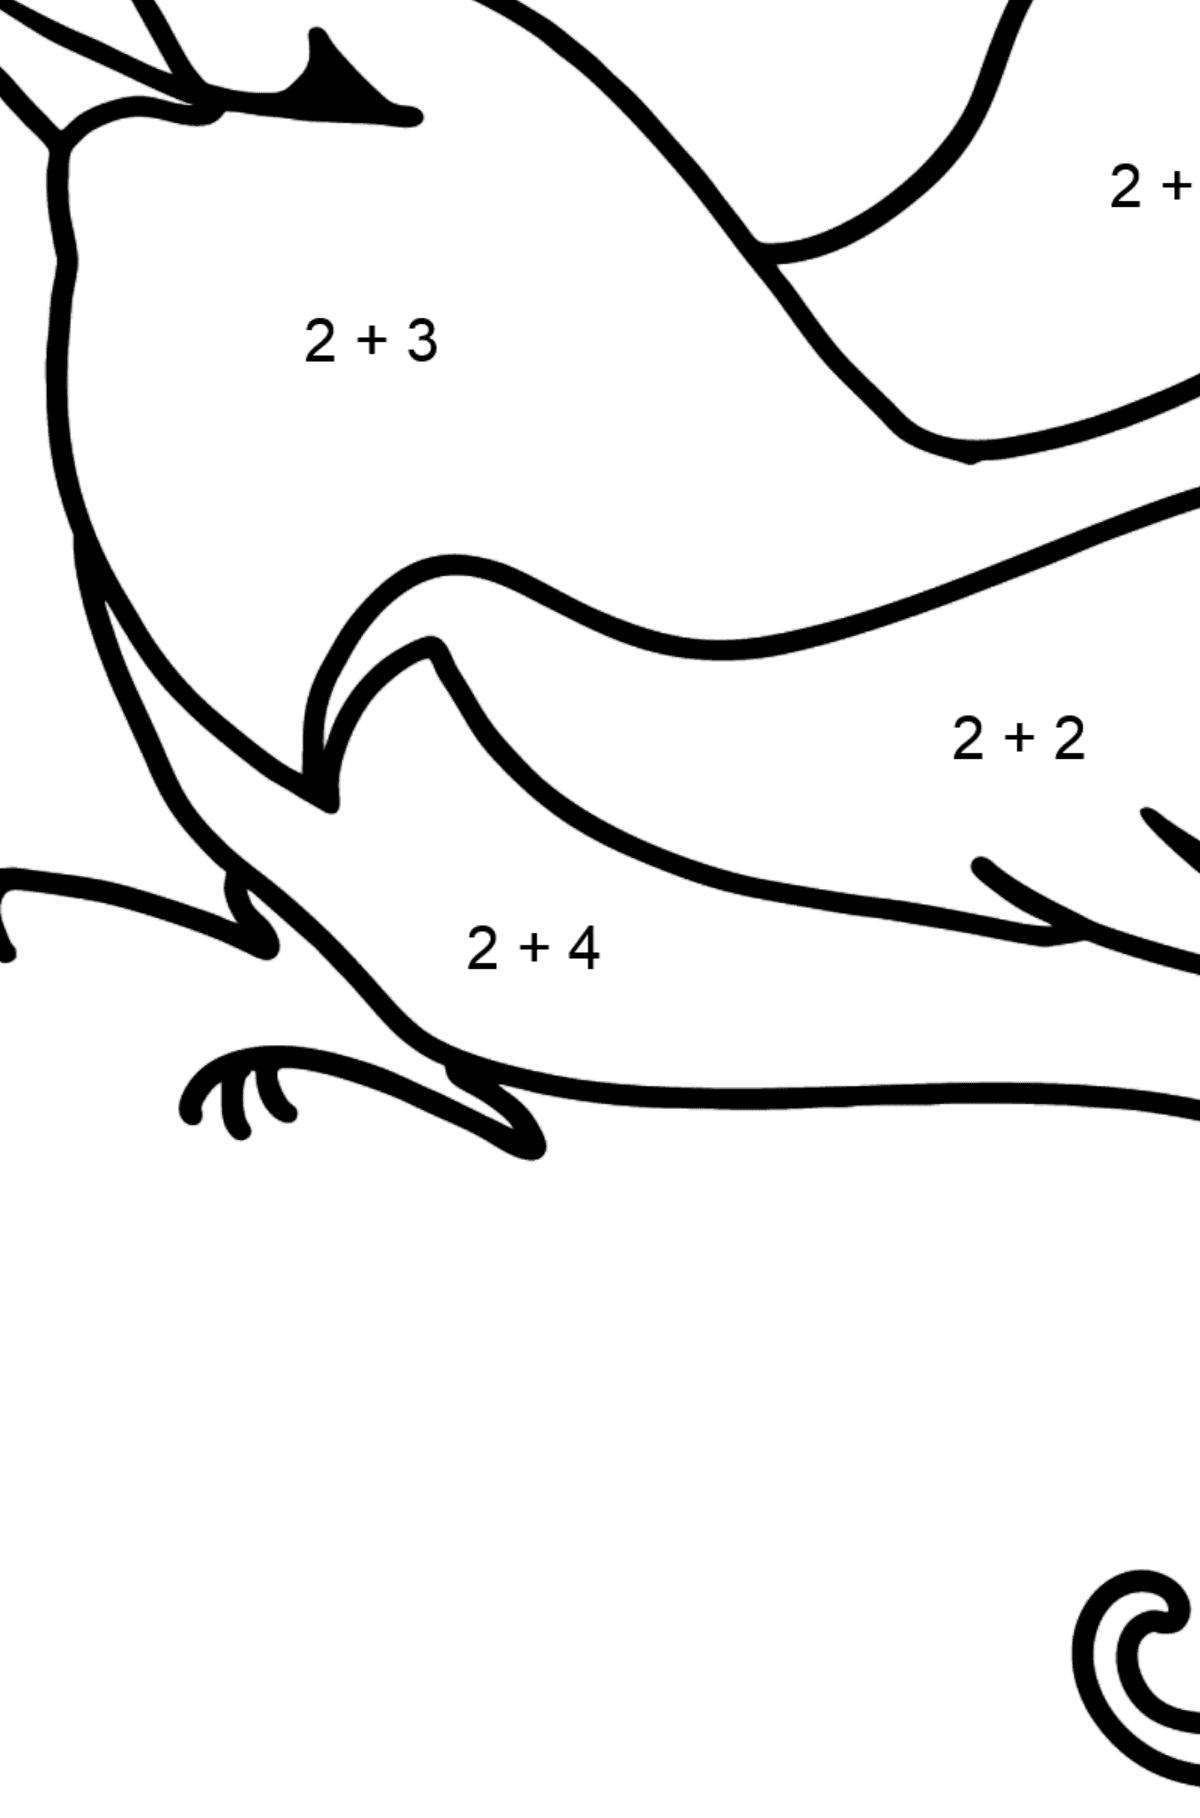 Hummingbird coloring page - Math Coloring - Addition for Kids